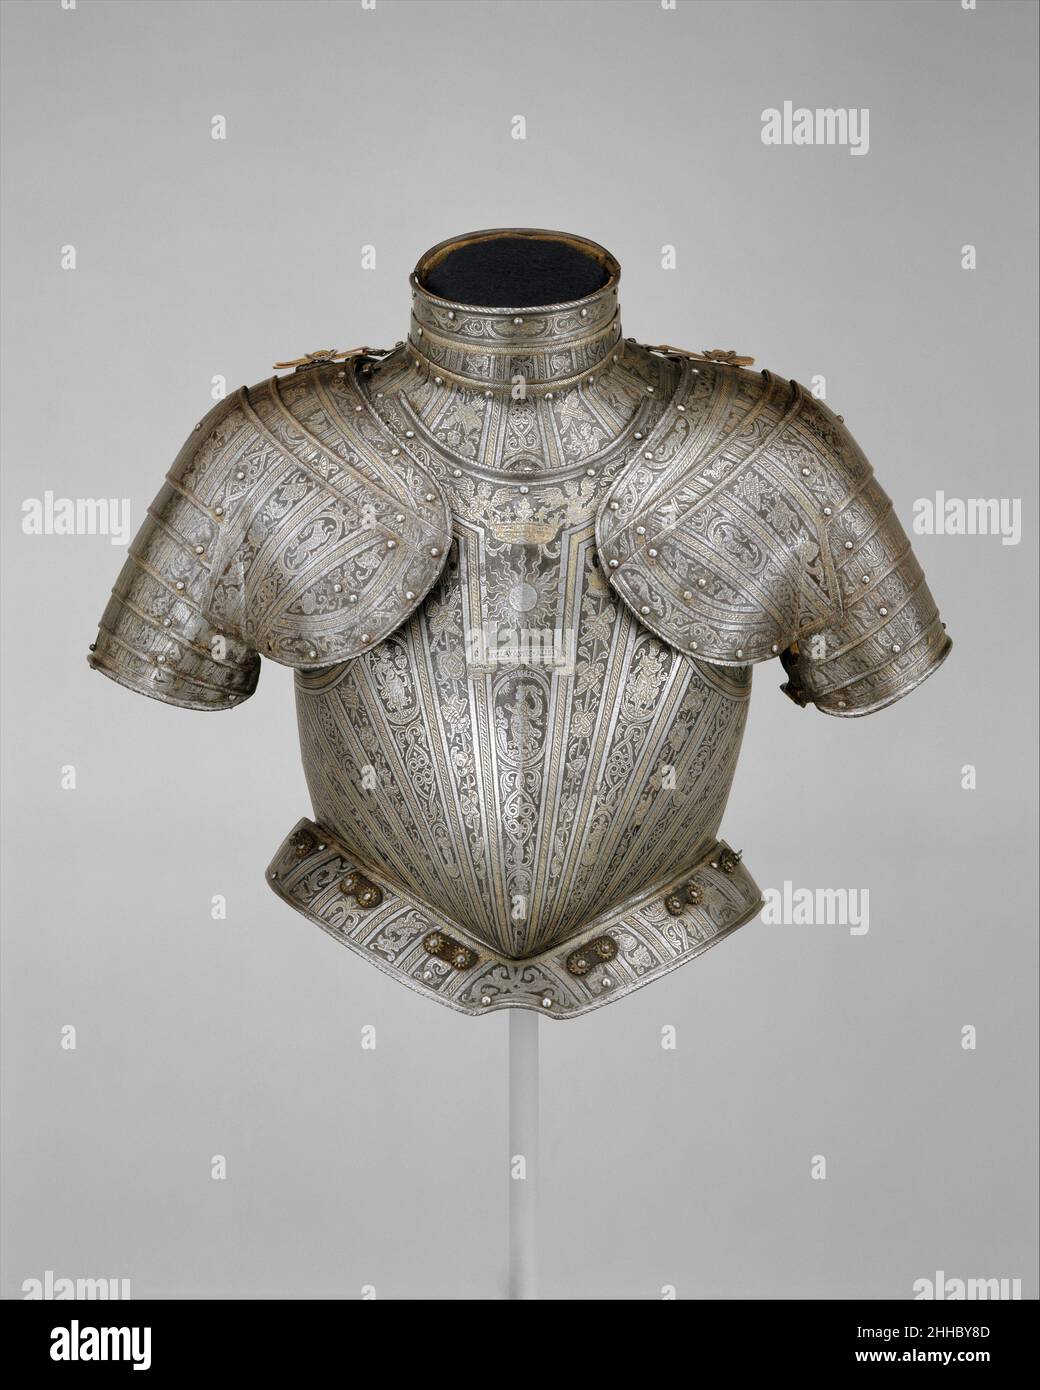 Demi-Chanfron, c. 1550. The chanfron, head defense for a horse, was  introduced in the 1300s. It included two side pieces to protect the cheeks.  In the 16th and 17th centuries, when armor